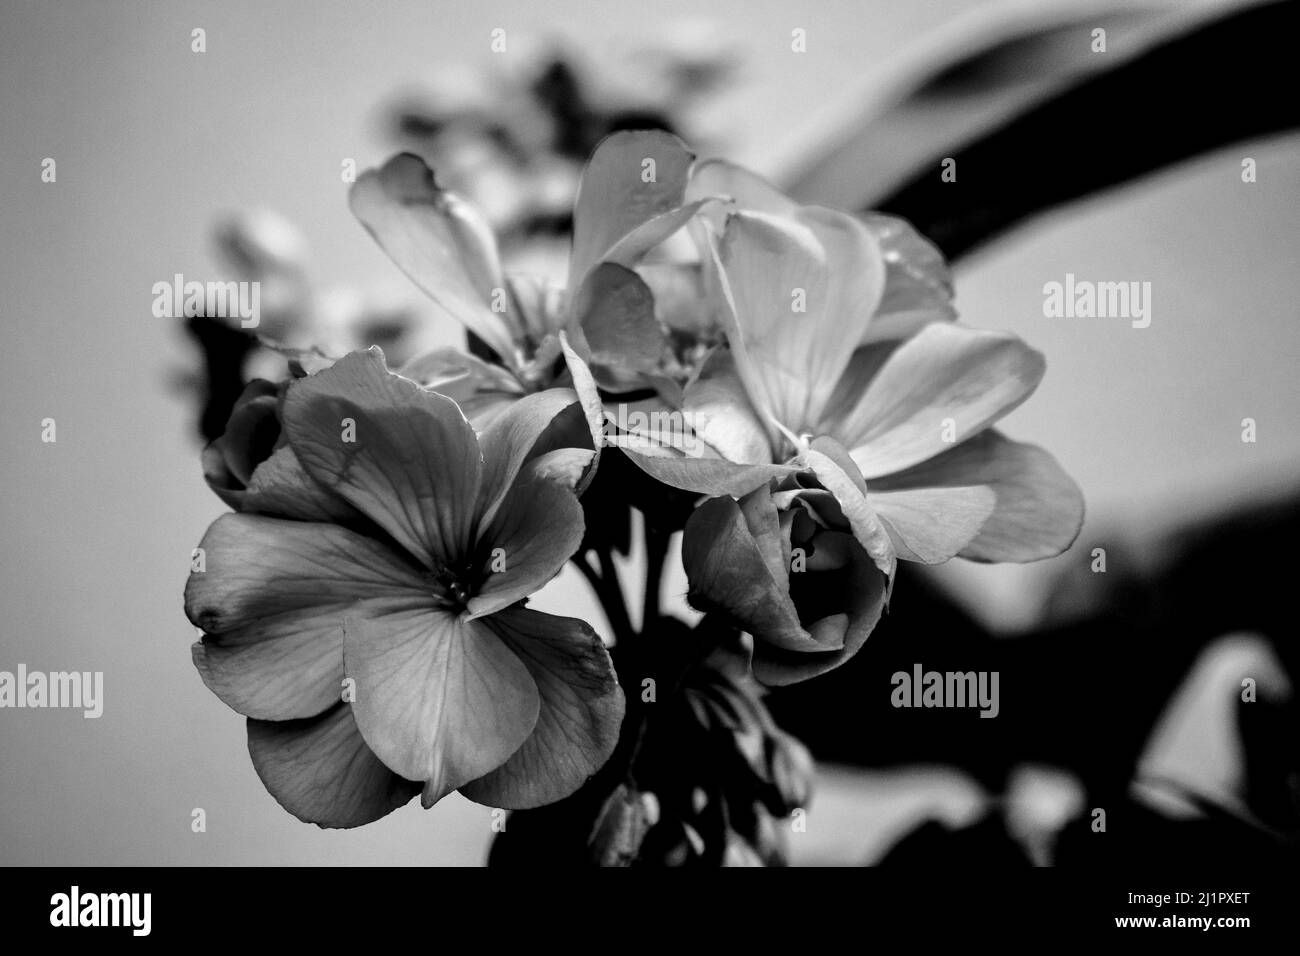 A black and white photo of Geranium flower - stock photography Stock Photo